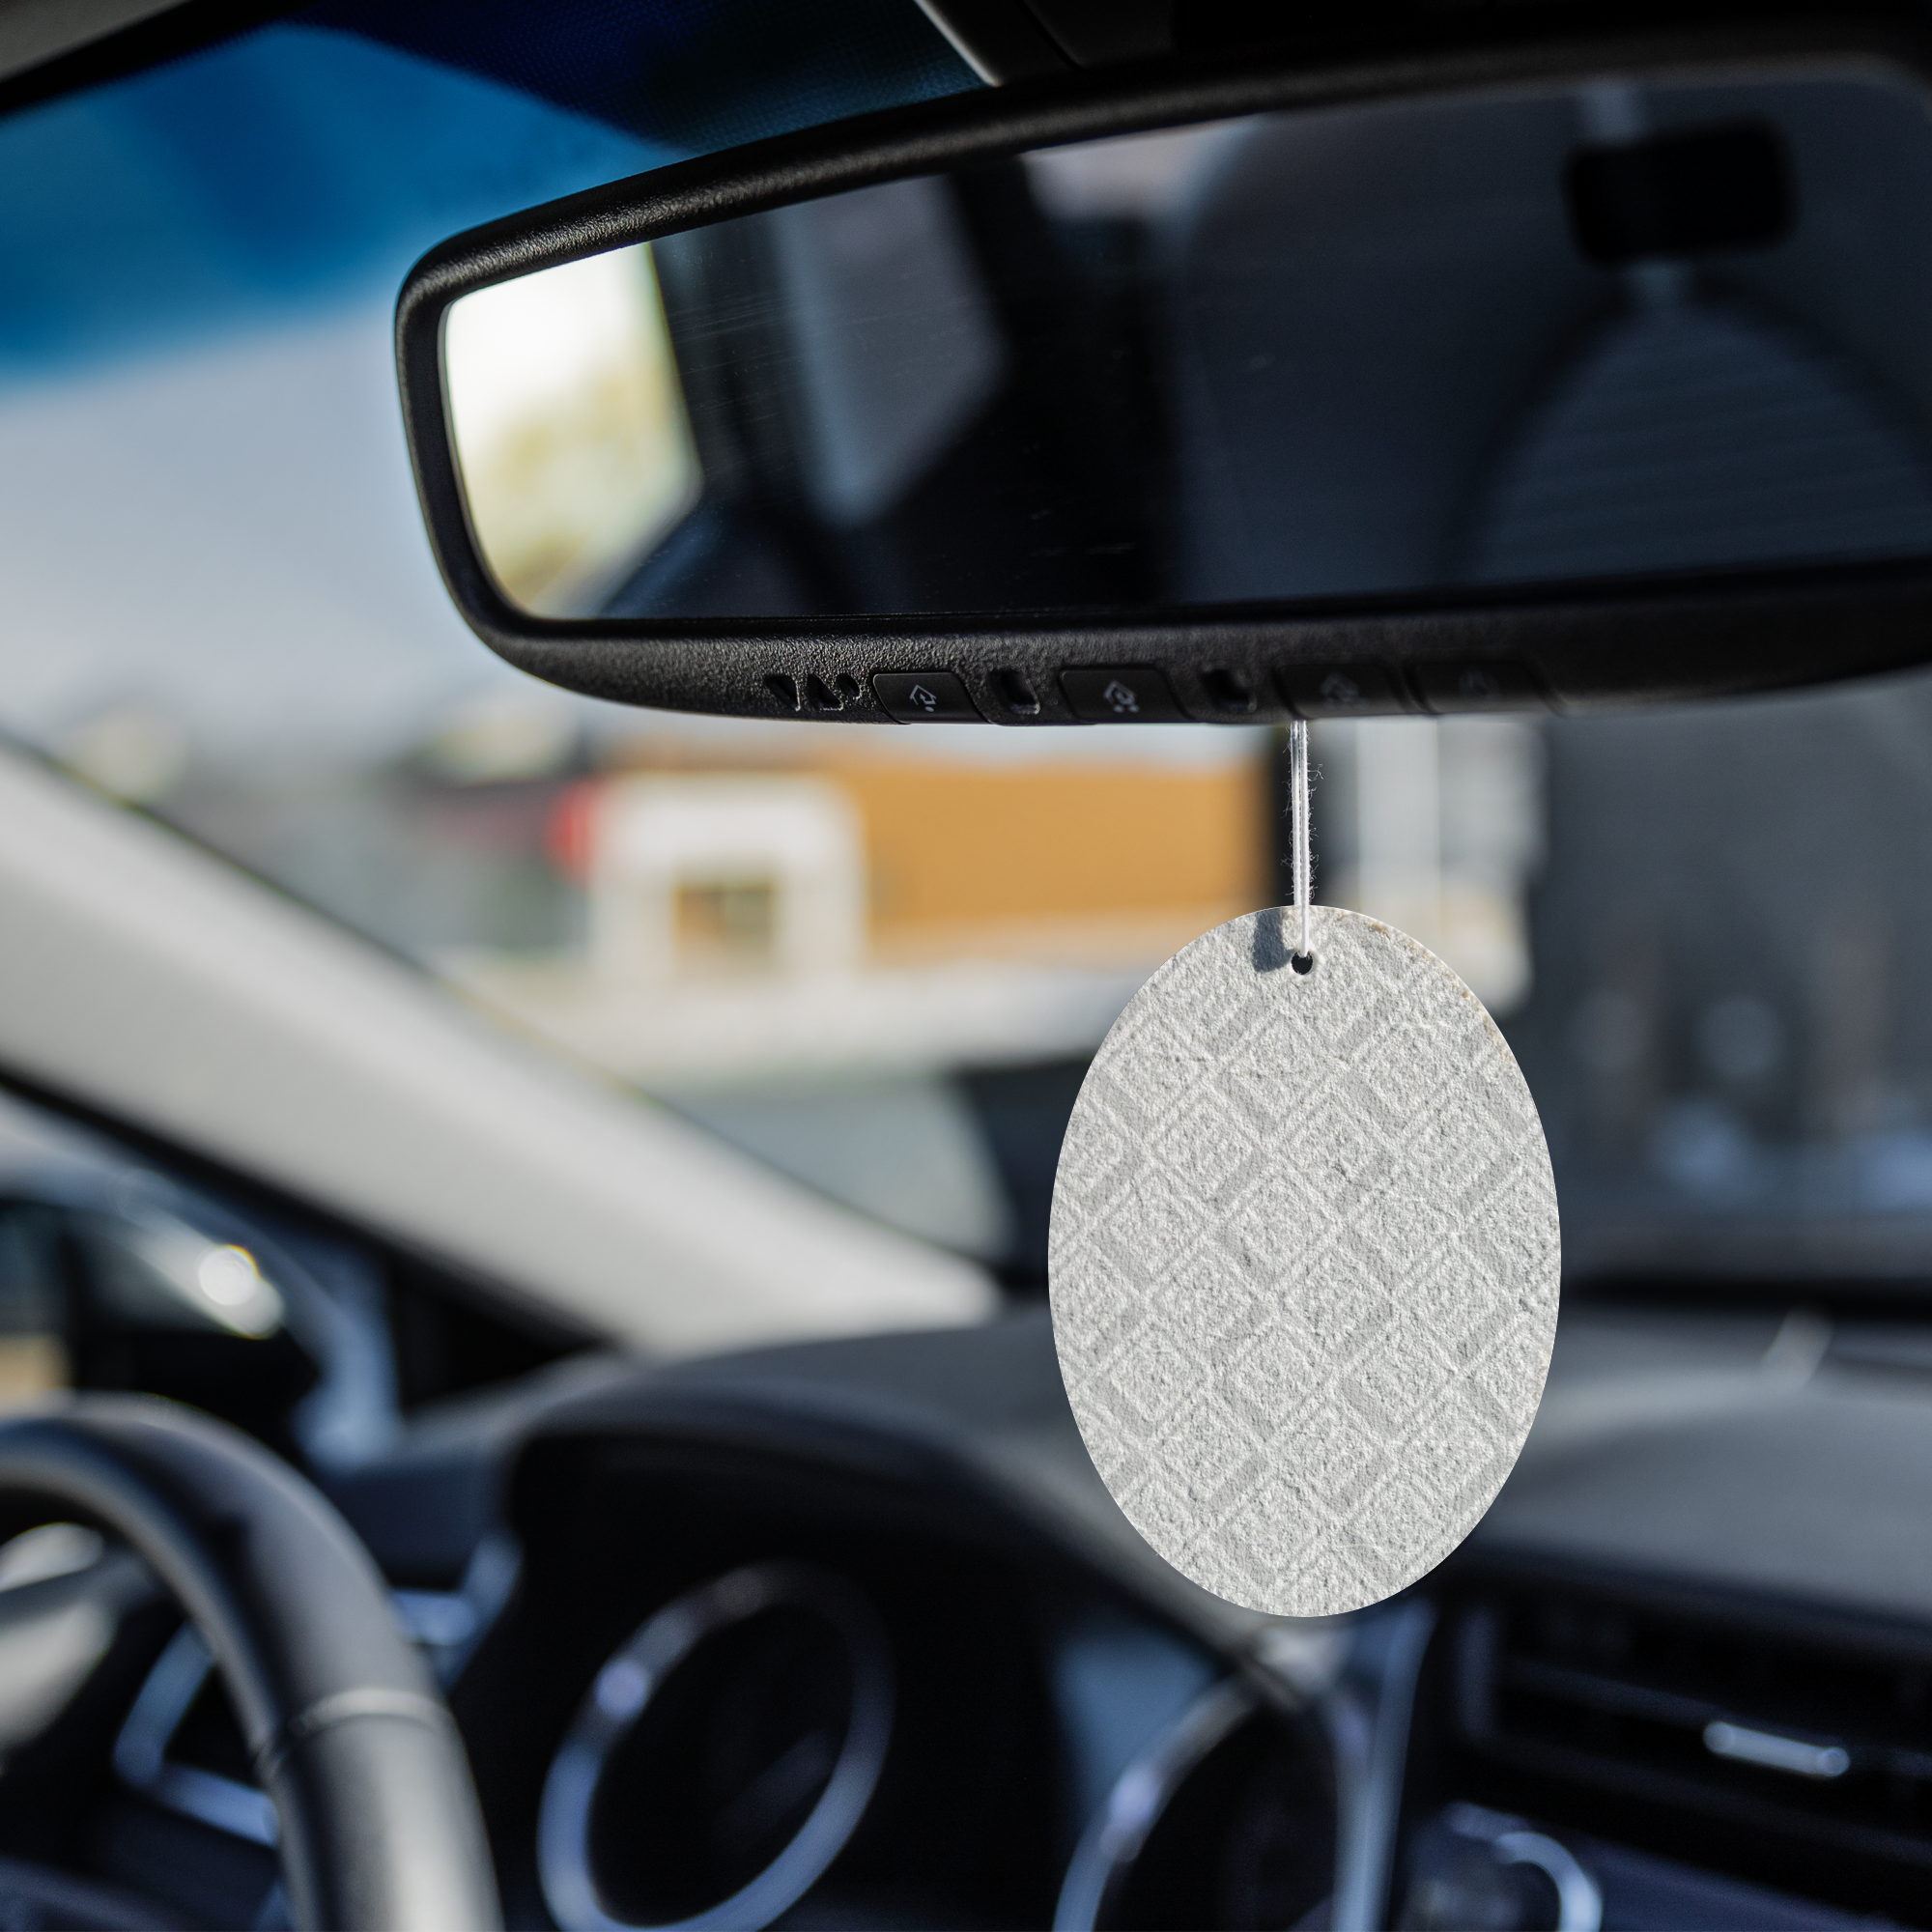 Personalize this Air Freshener